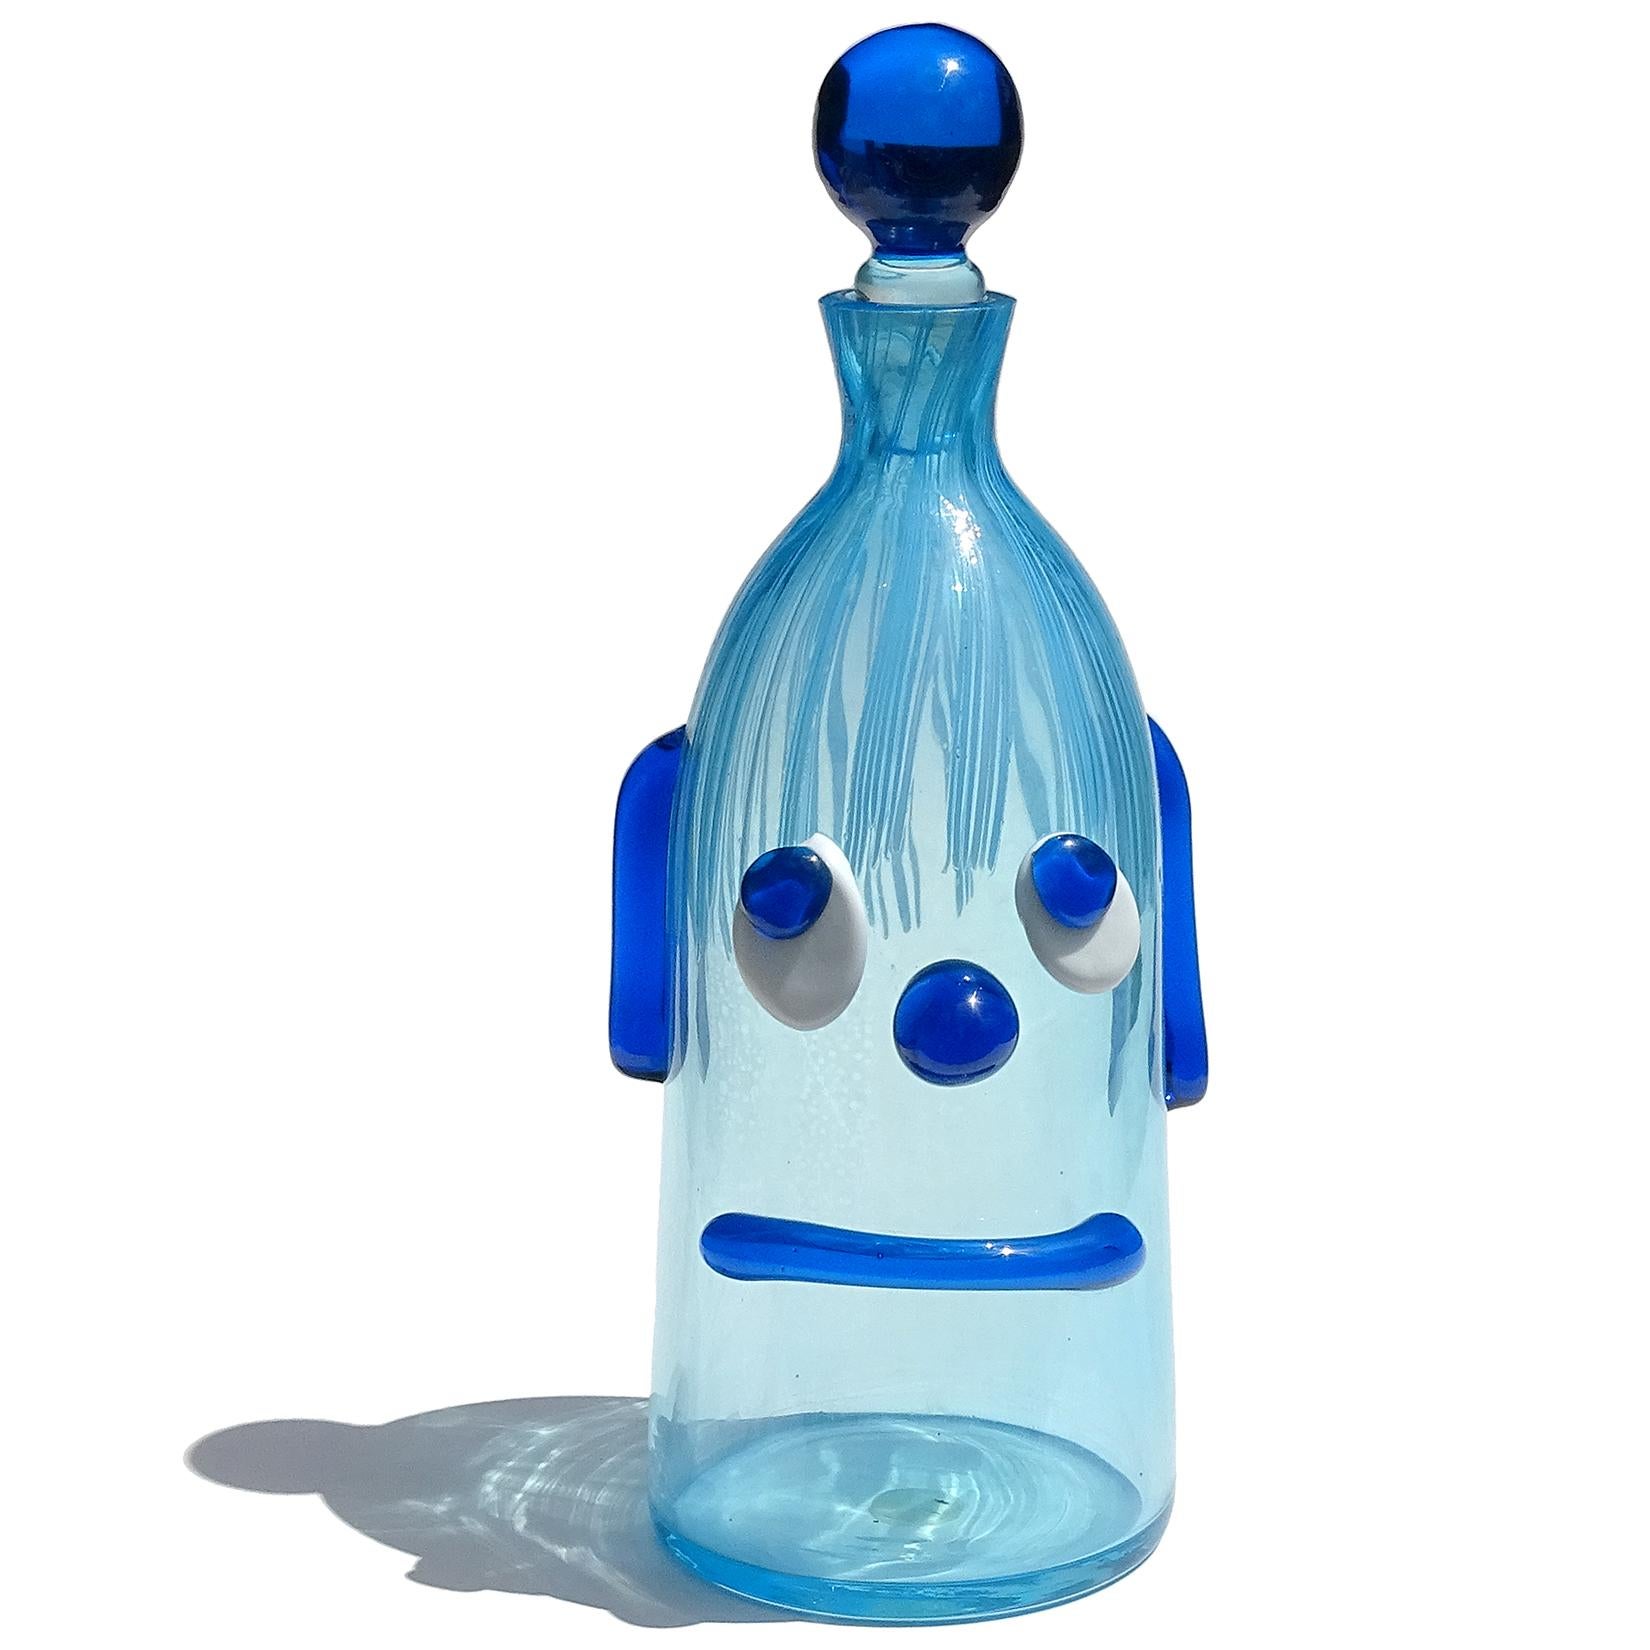 Reserved for Joey

Cute and unusual Murano hand blown blue Italian art glass decanter with clown face. Documented to the Fratelli Toso Company. It still retains a worn 